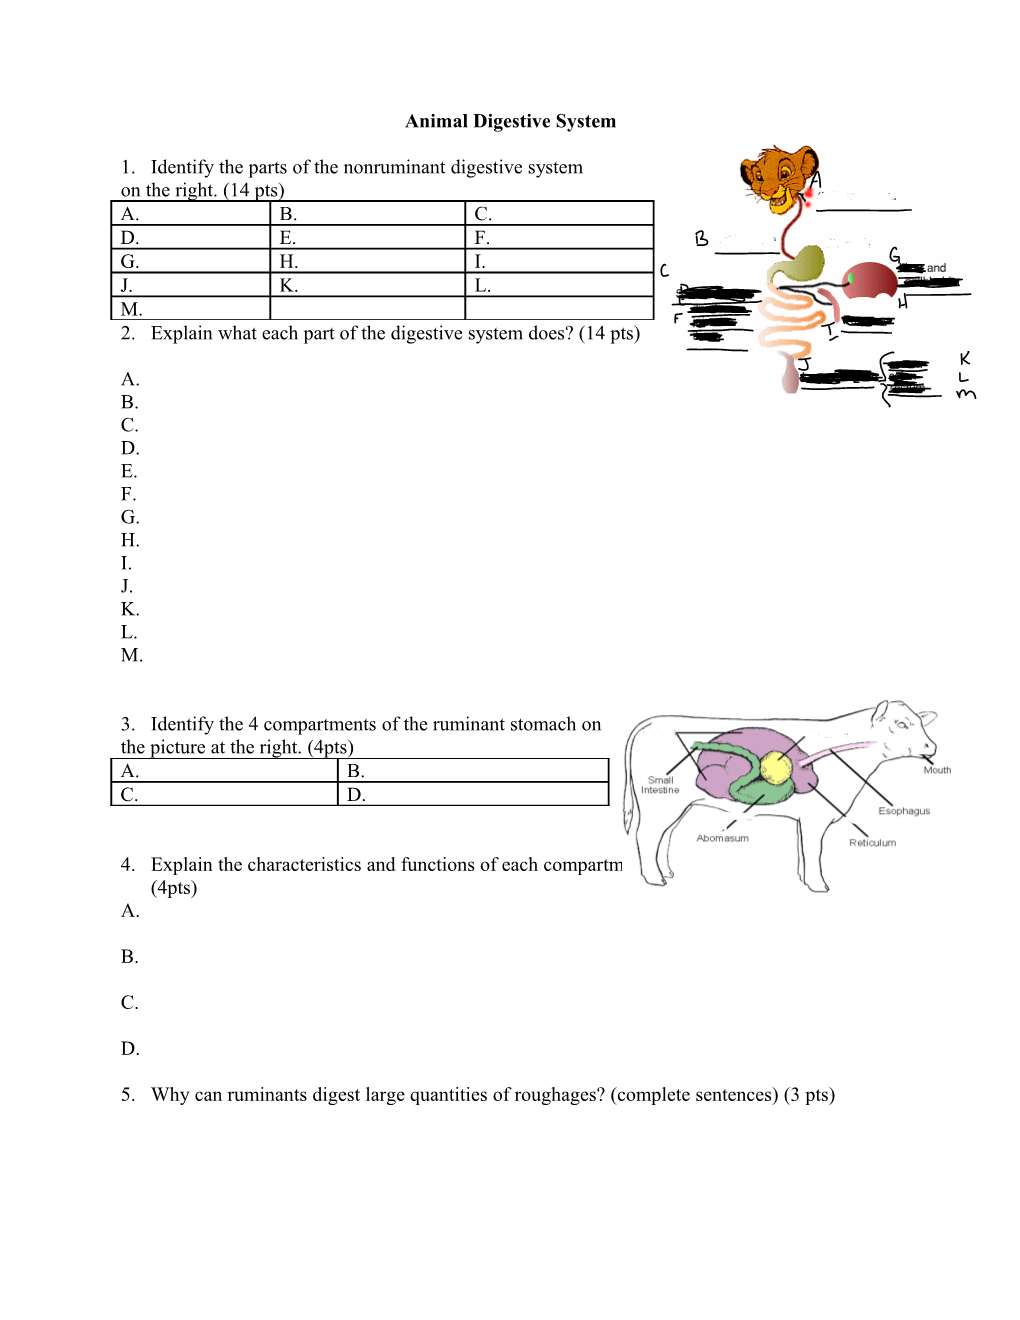 Animal Digestive System Review